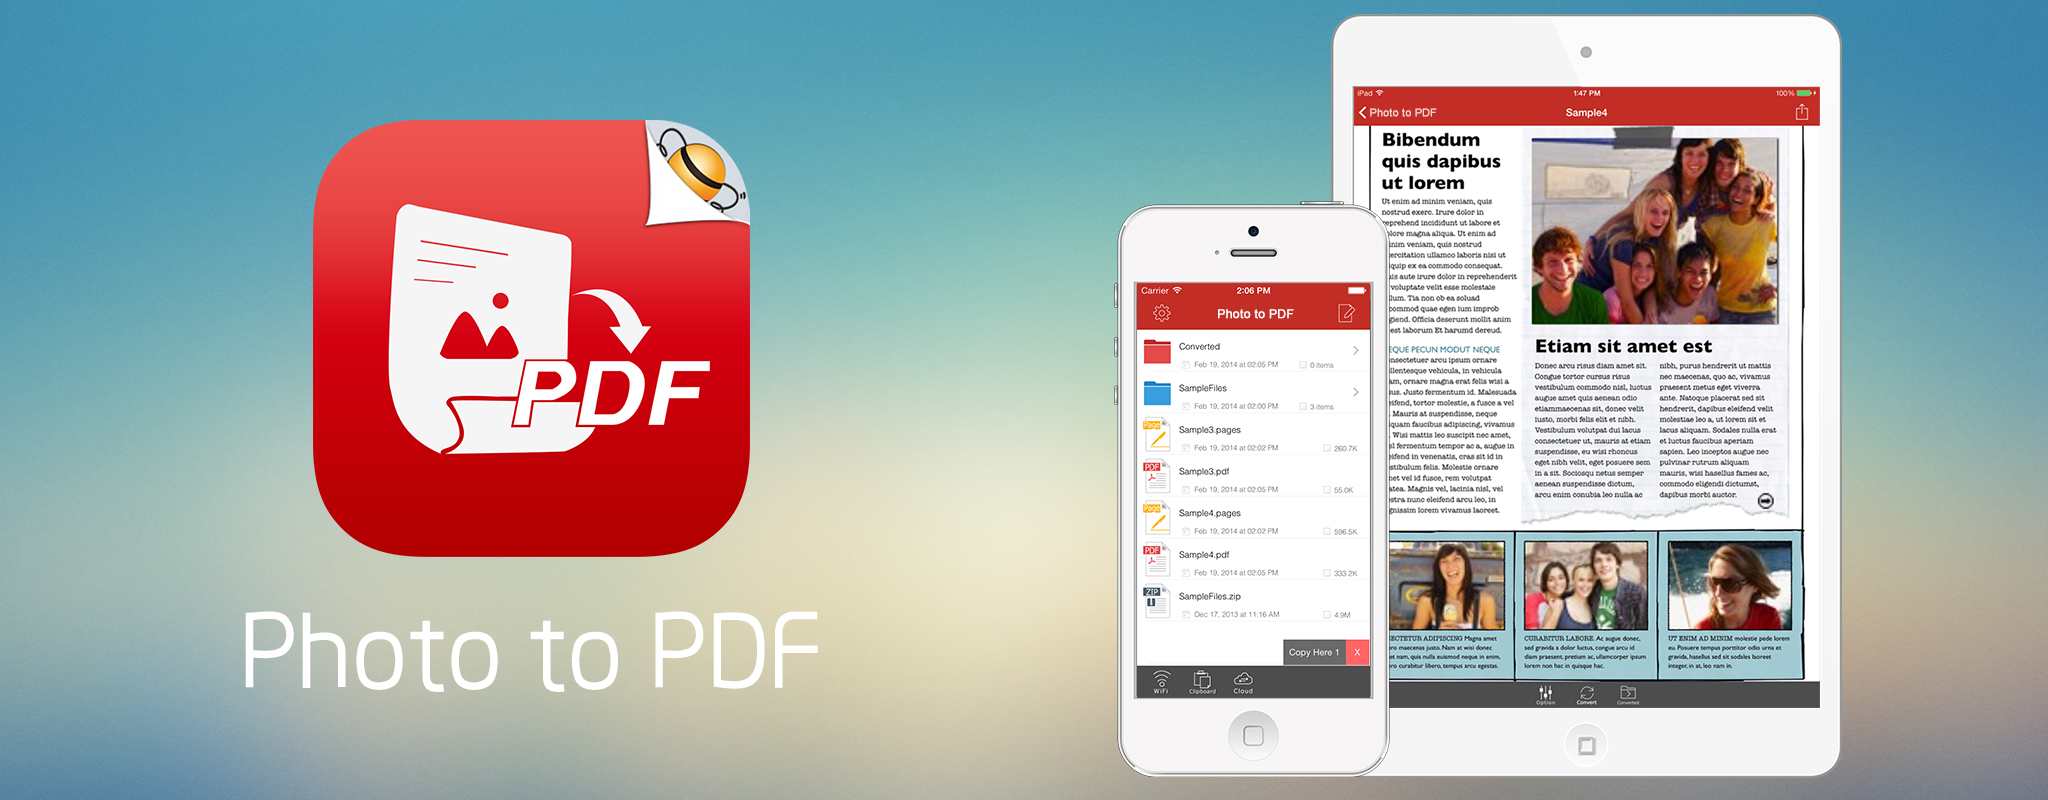 How to import photos to Photo to PDF app？